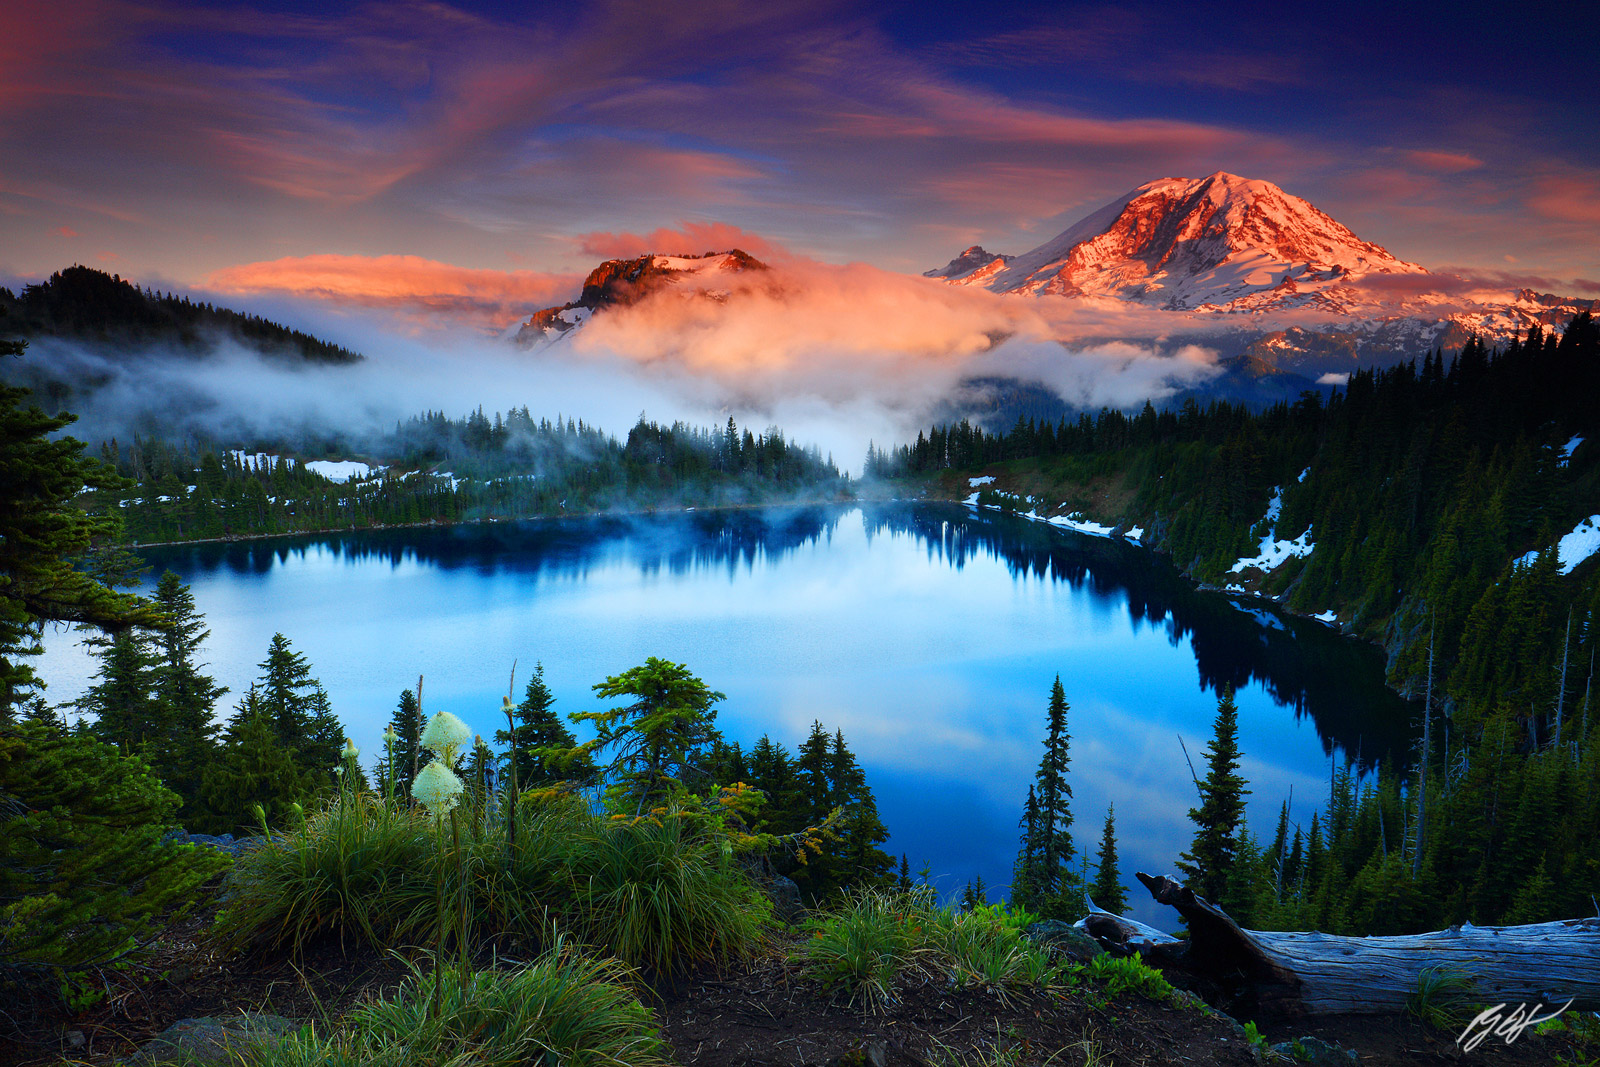 Sunset Mt Rainier and Summit Lake in the Clearwater Wilderness in Washington